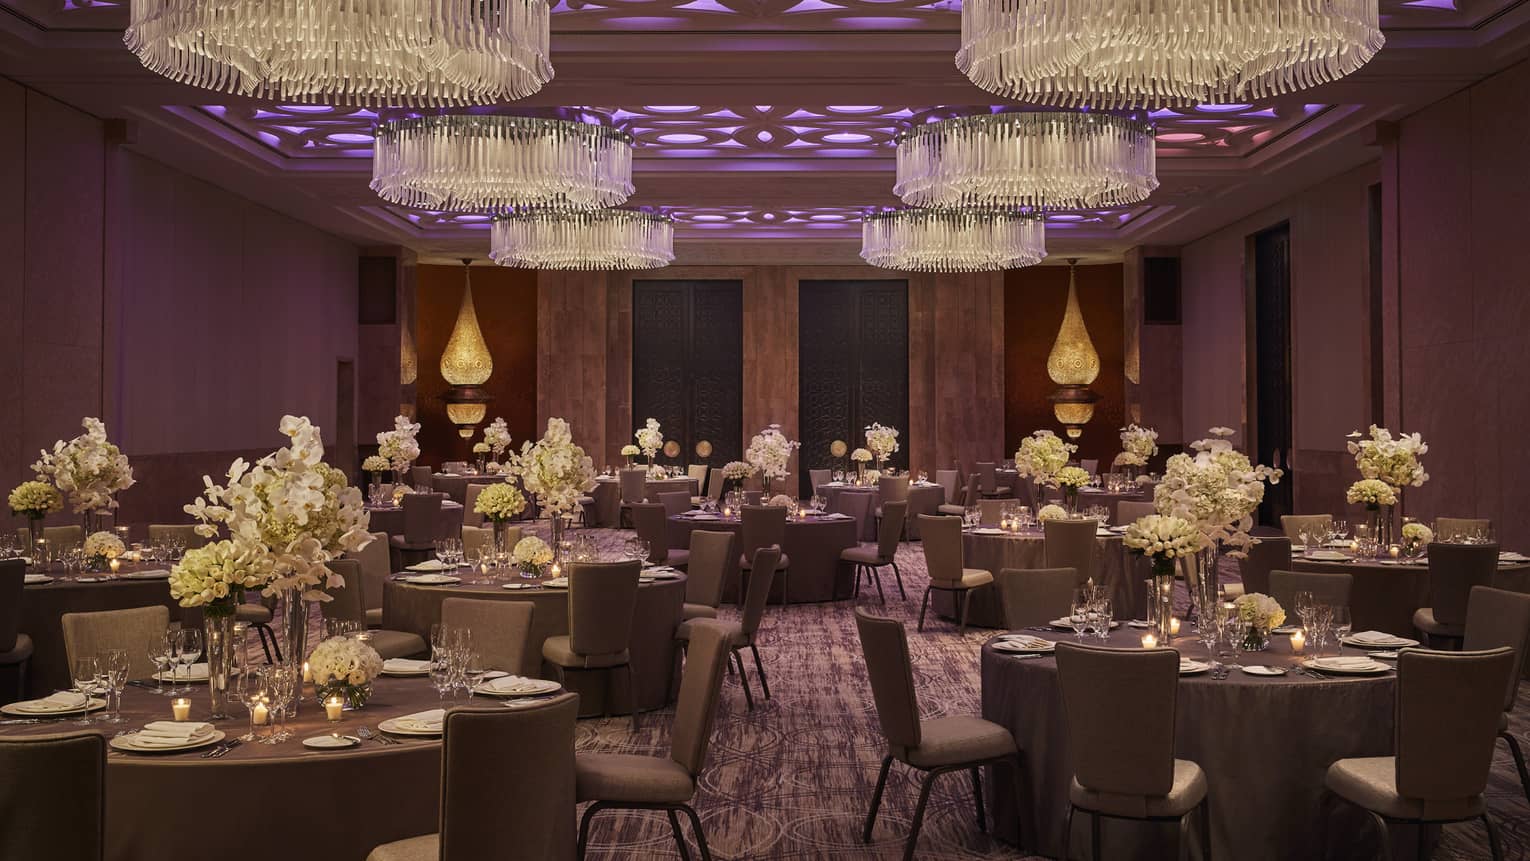 Round banquet dining tables in ballroom with round chandeliers, purple lights on ceiling